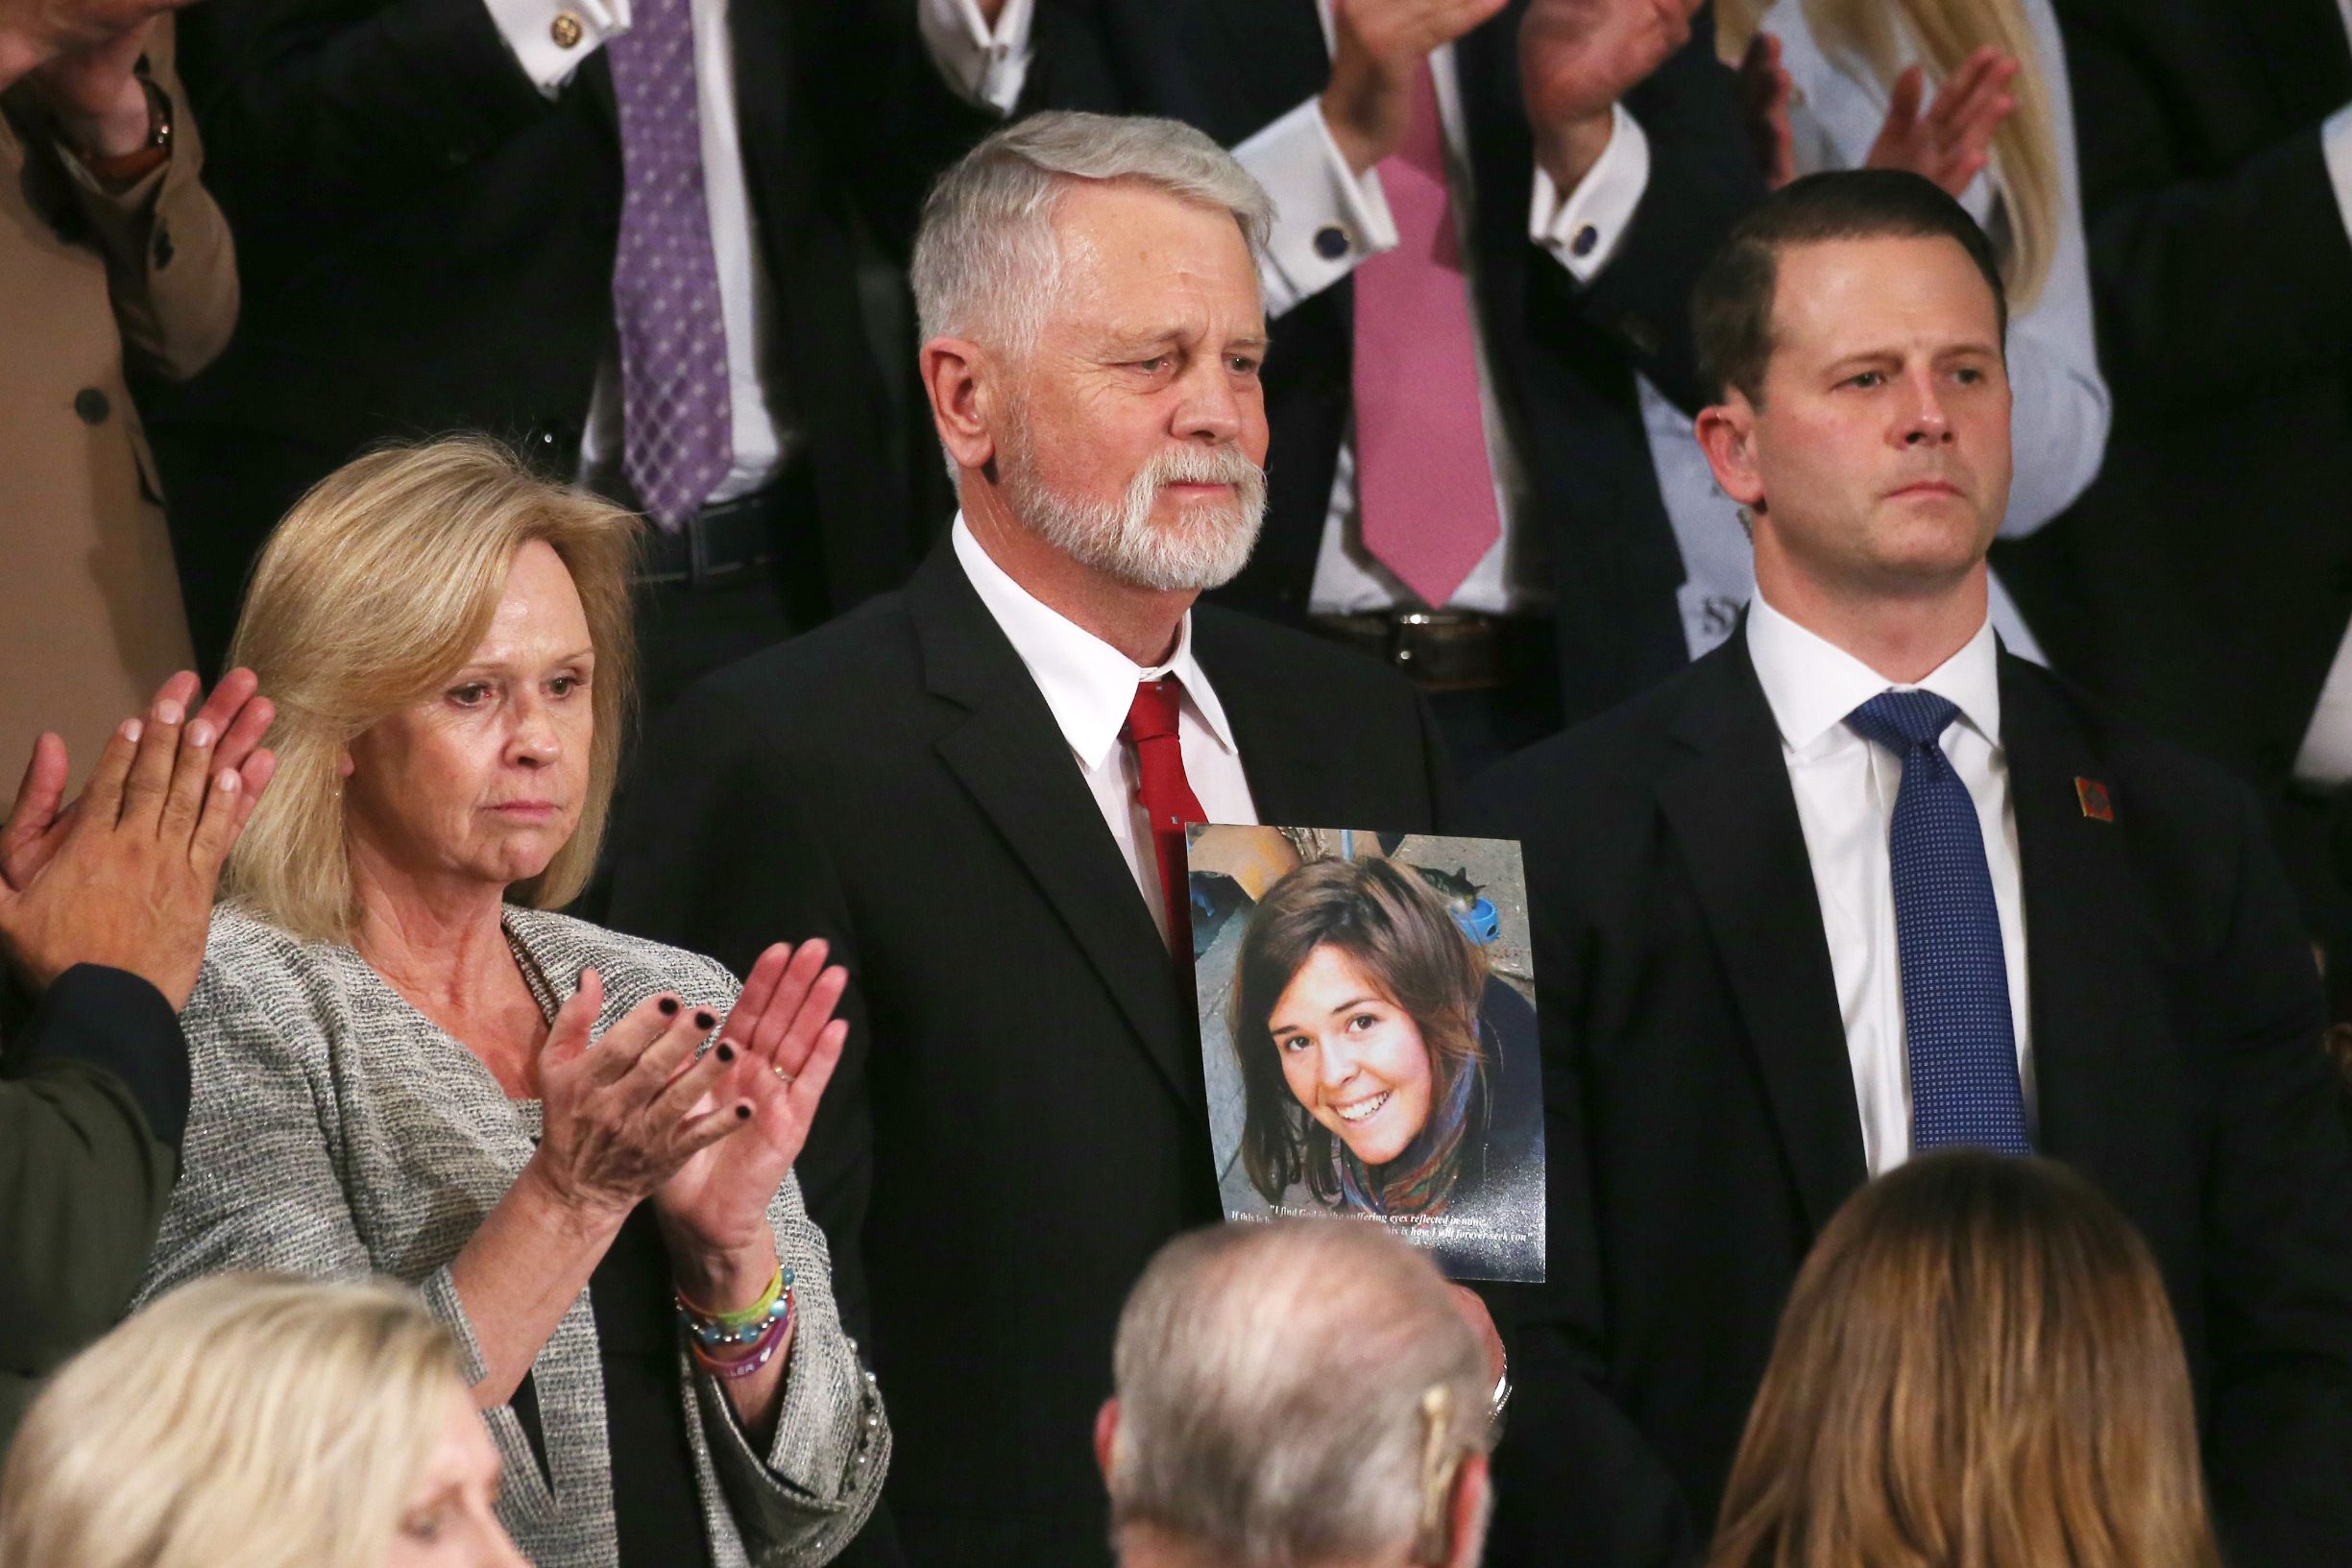 WASHINGTON, DC - FEBRUARY 04: Carl Mueller (C) holds a photo of his daughter, Kayla, as his wife Marsha (L) looks on during the State of the Union address in the chamber of the U.S. House of Representatives on February 04, 2020 in Washington, DC. President Trump delivers his third State of the Union to the nation the night before the U.S. Senate is set to vote in his impeachment trial.   Mario Tama/Getty Images/AFP
== FOR NEWSPAPERS, INTERNET, TELCOS & TELEVISION USE ONLY ==